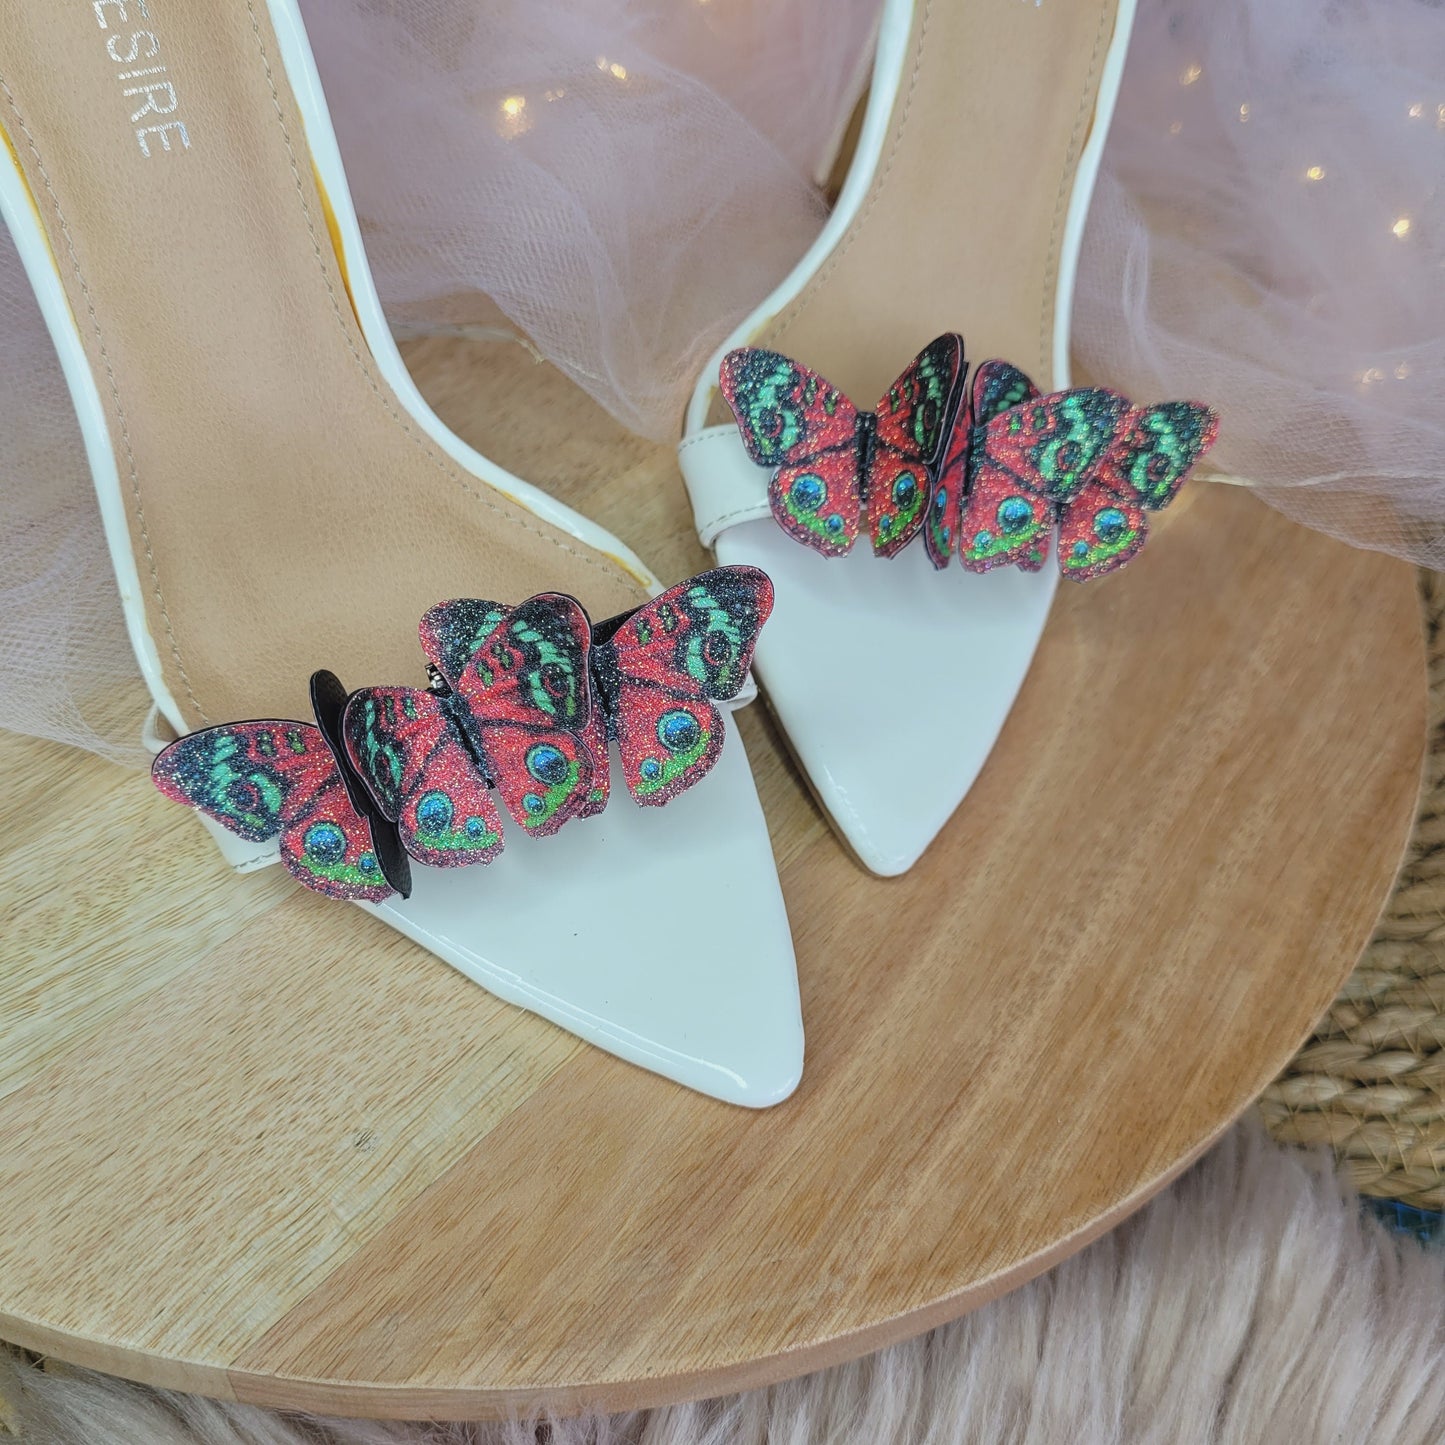 Red Peacock Butterflies Shoe Clips, Glitter Butterflies, wedding shoe clips, bridal shoe, butterfliy shoes, bridesmaid gift, wedding shoe